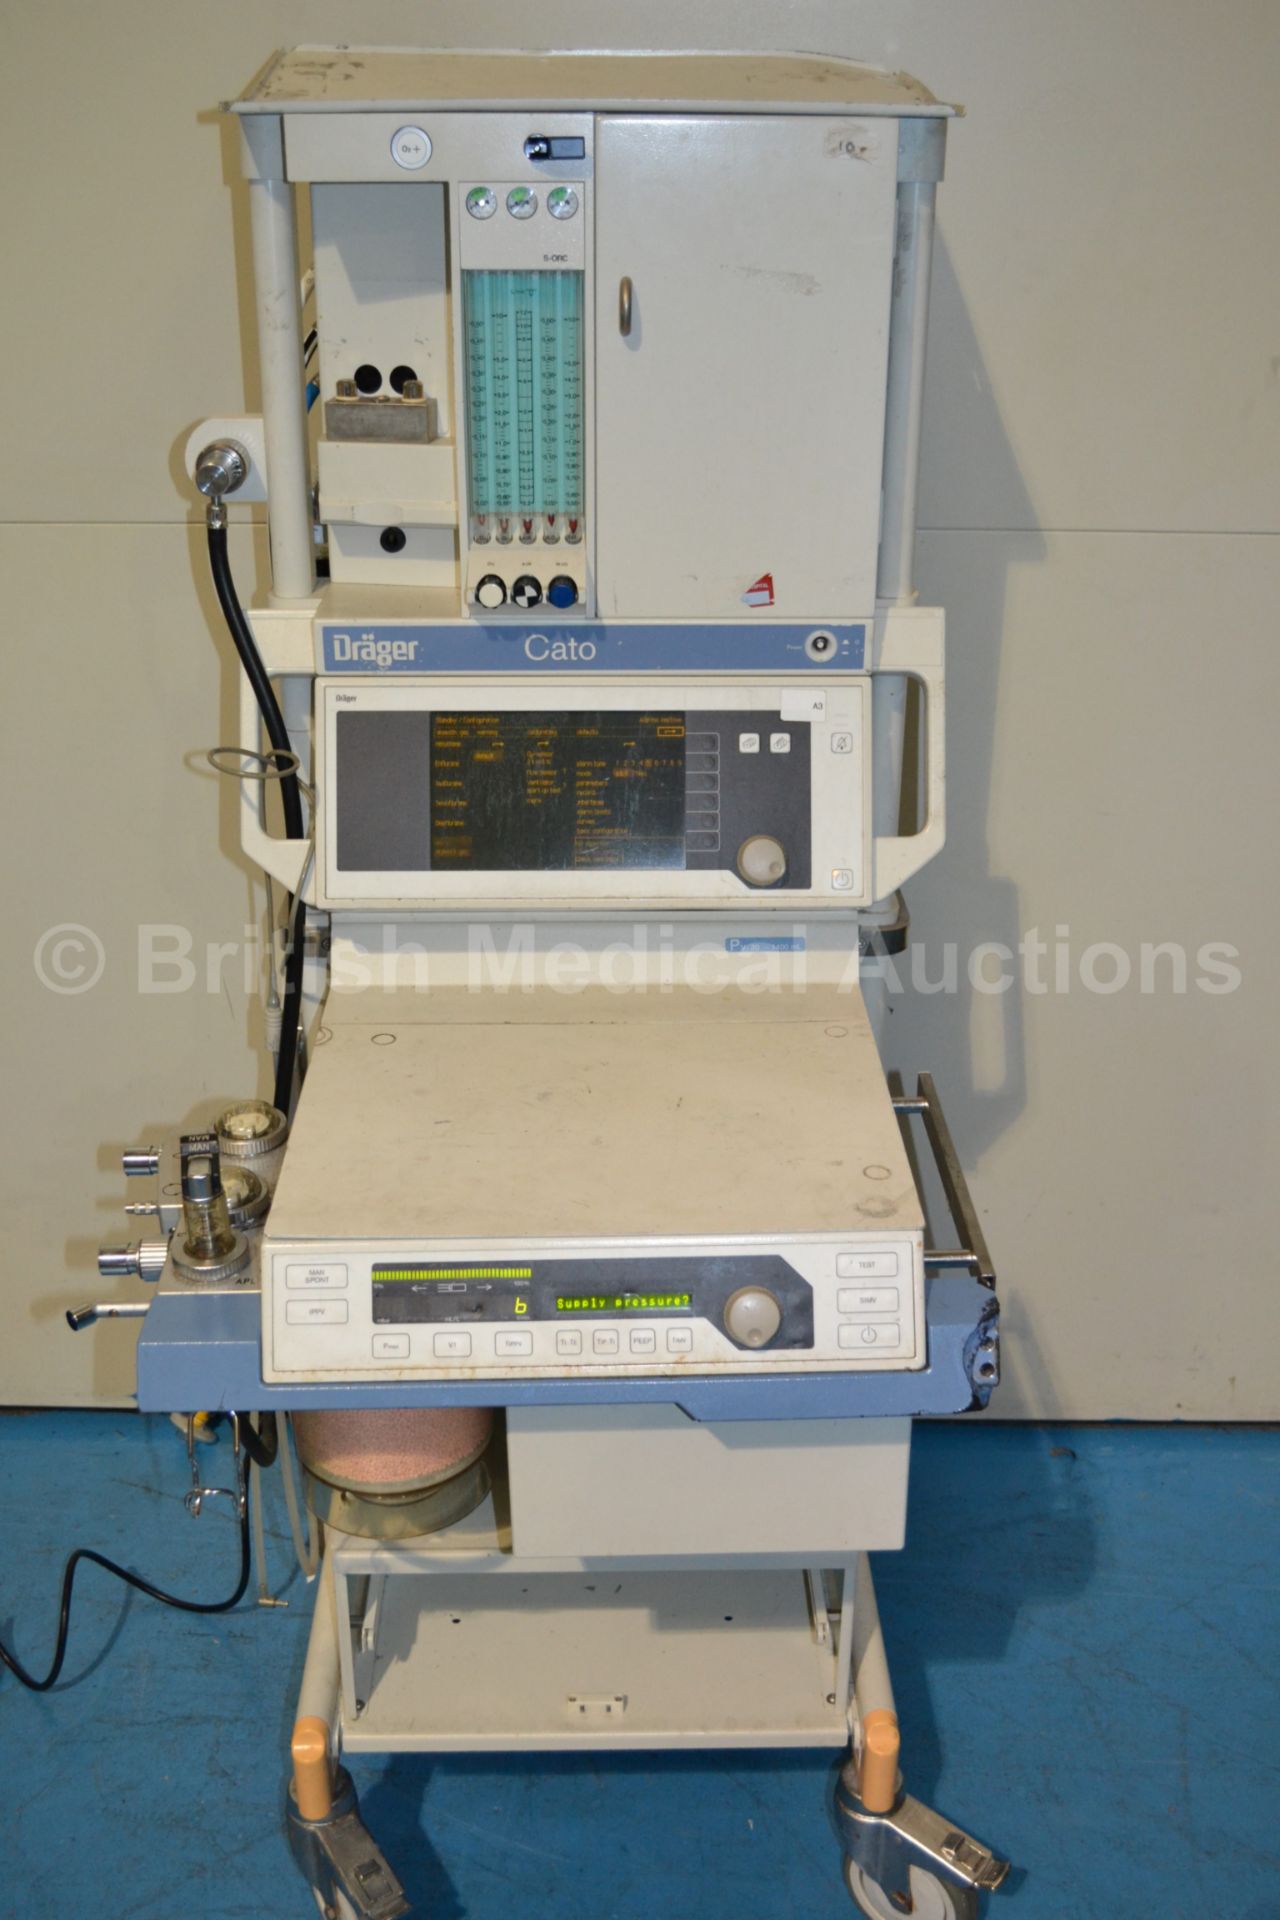 Drager Cato Anaesthesia Machine with Absorber and